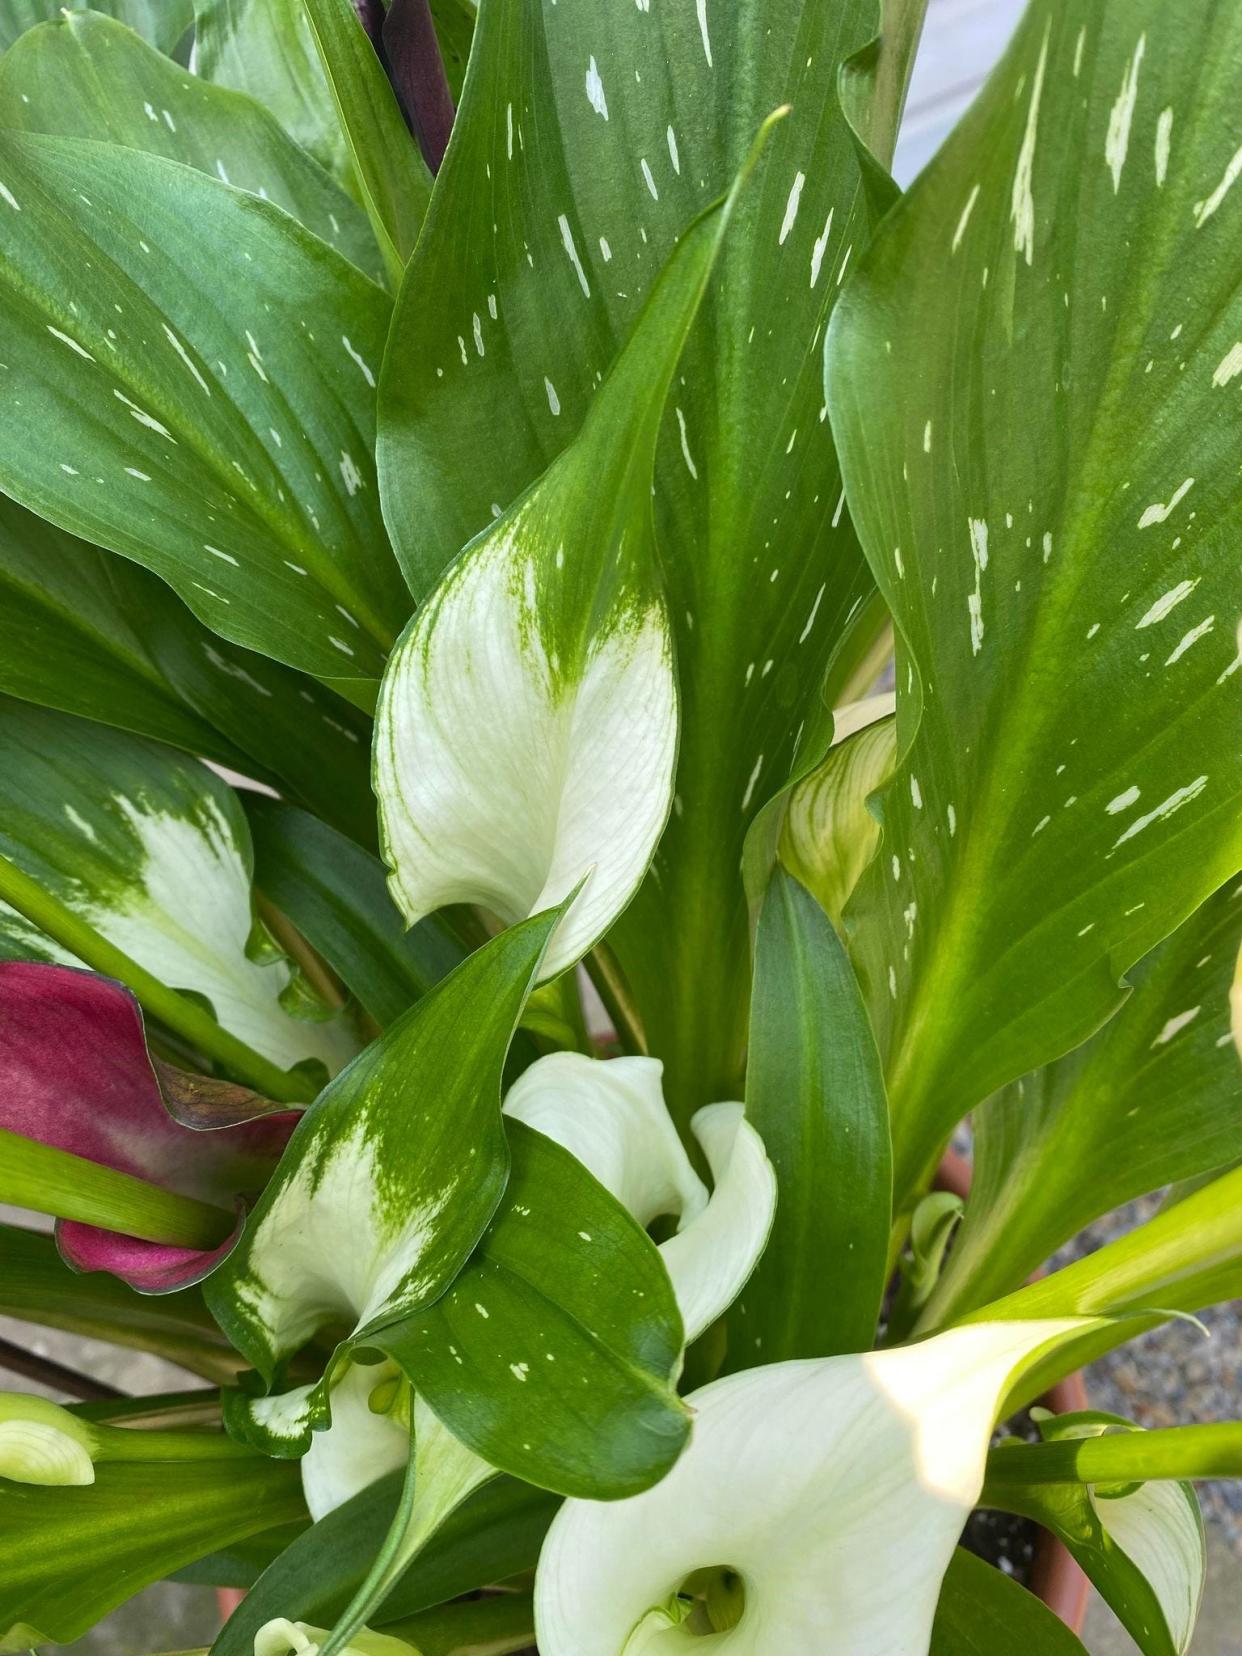 Calla lilies come in a variety of colors. The classic white is a favorite for weddings.